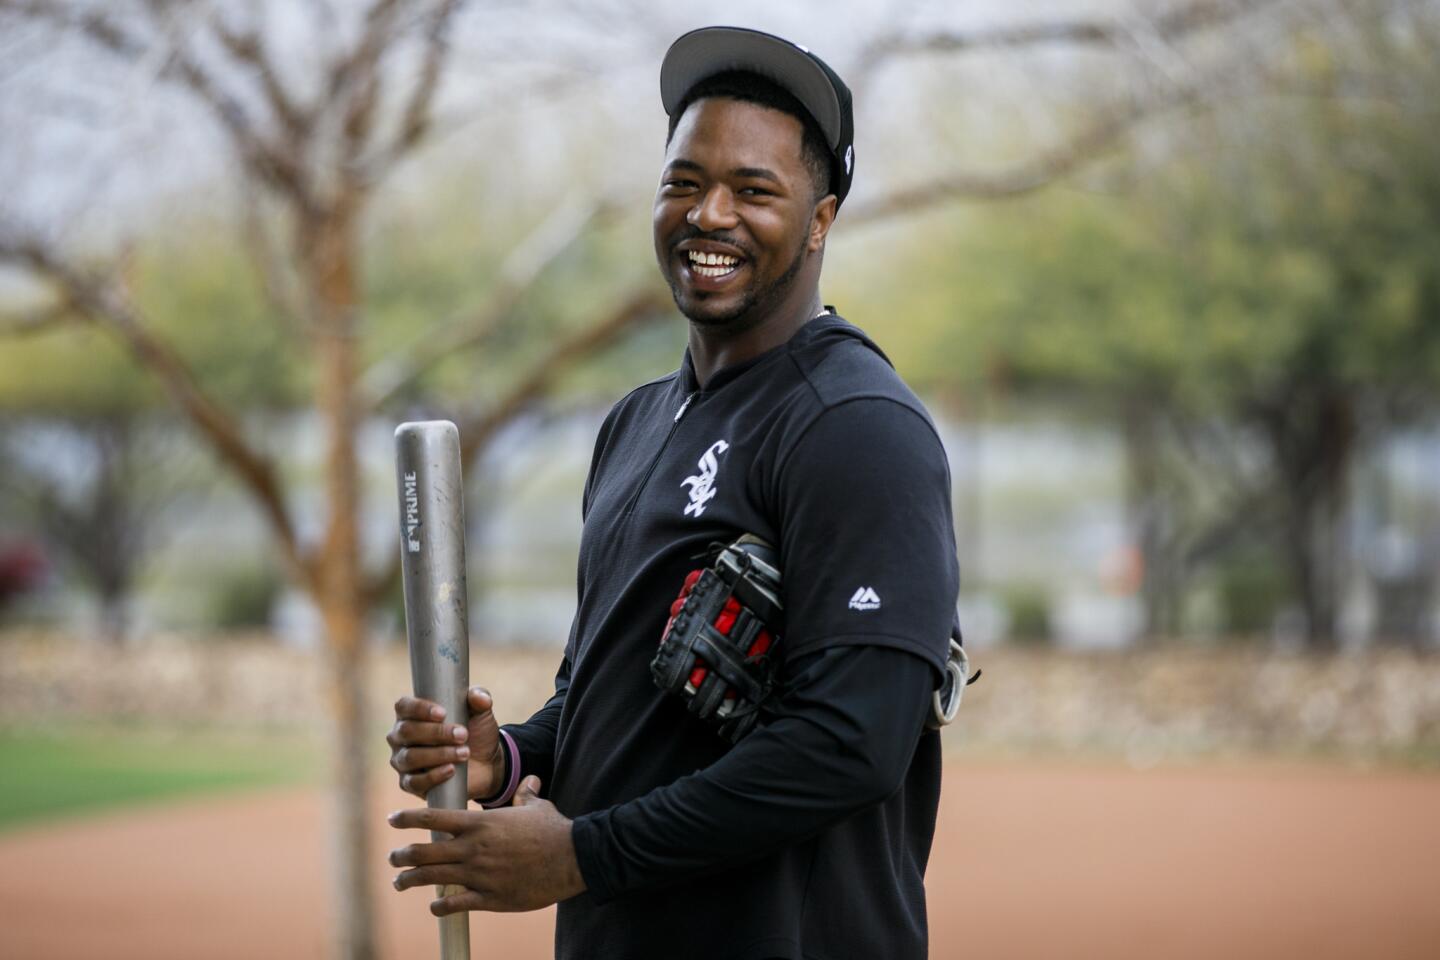 Eloy Jimenez stands near a batting cage during White Sox spring training at Camelback Ranch on Feb. 21, 2019.